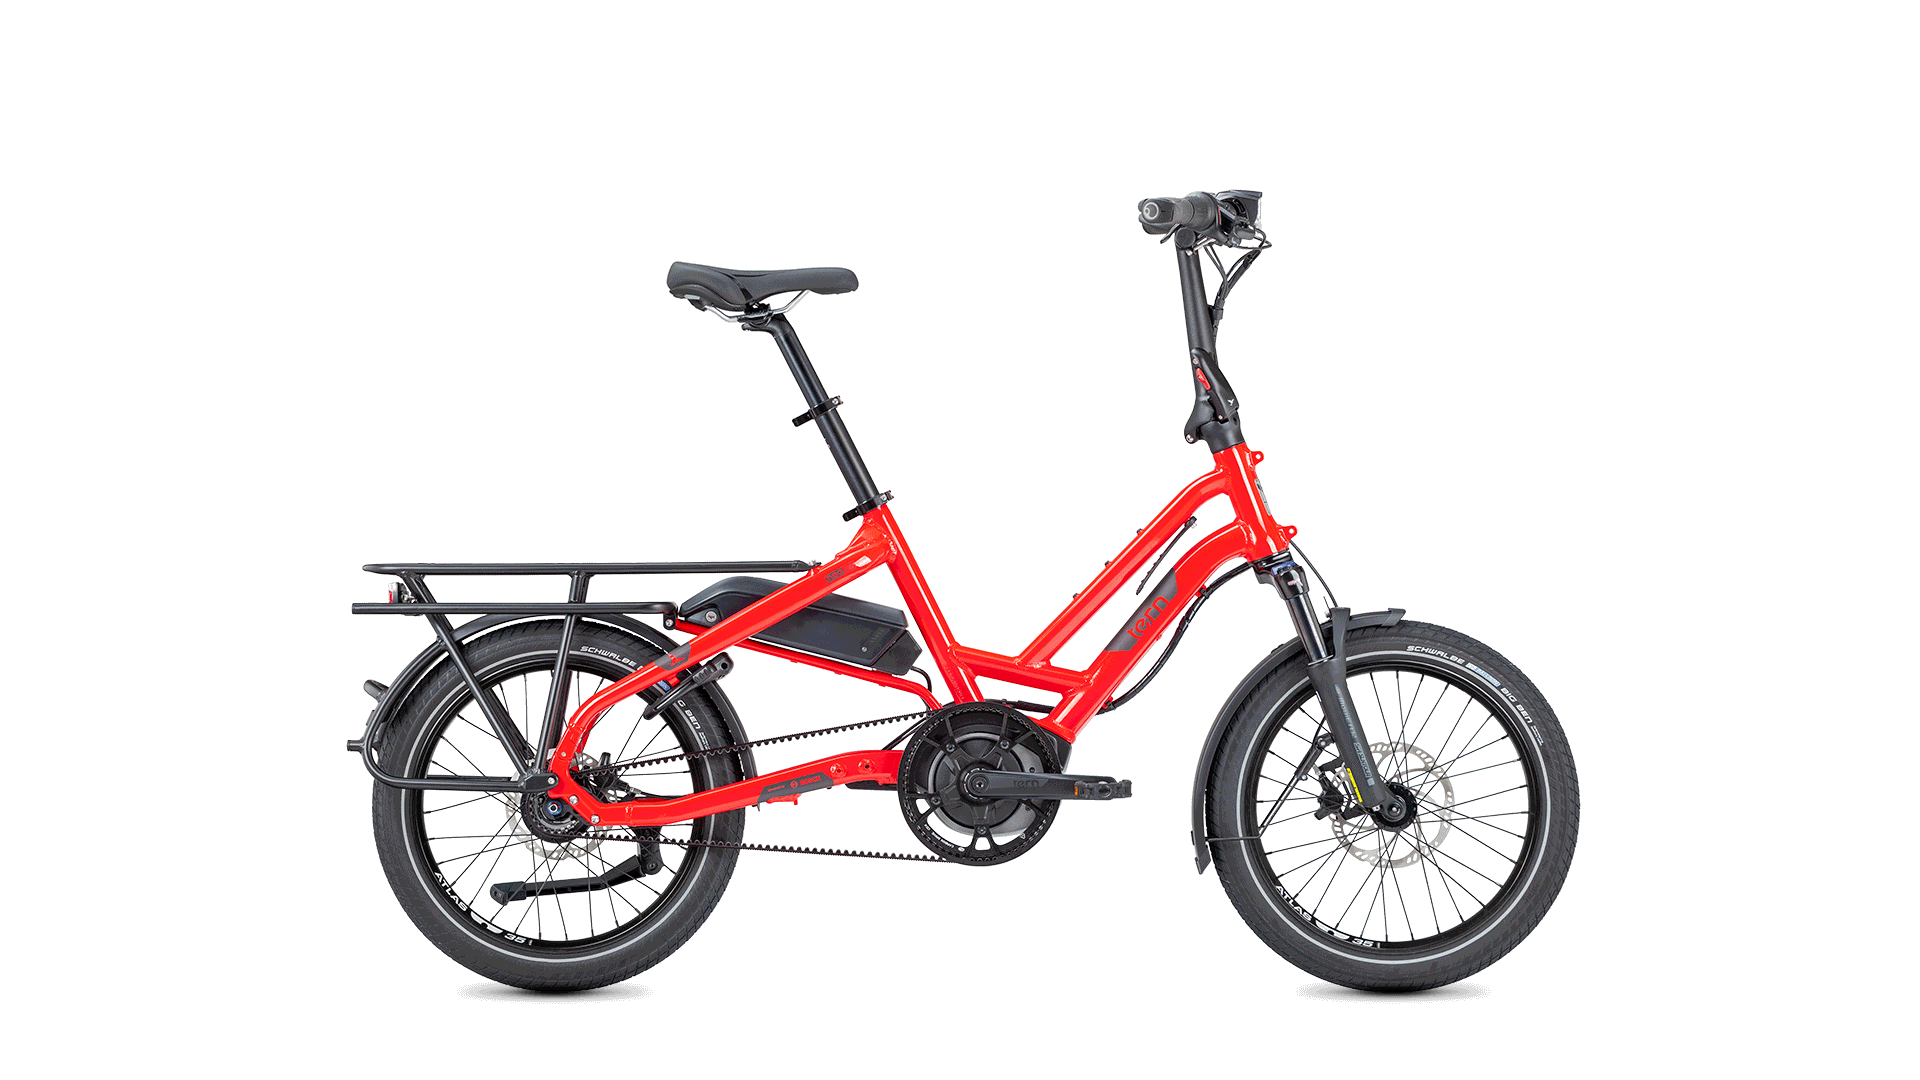 Tern HSD Accessories for sale - Propel eBikes